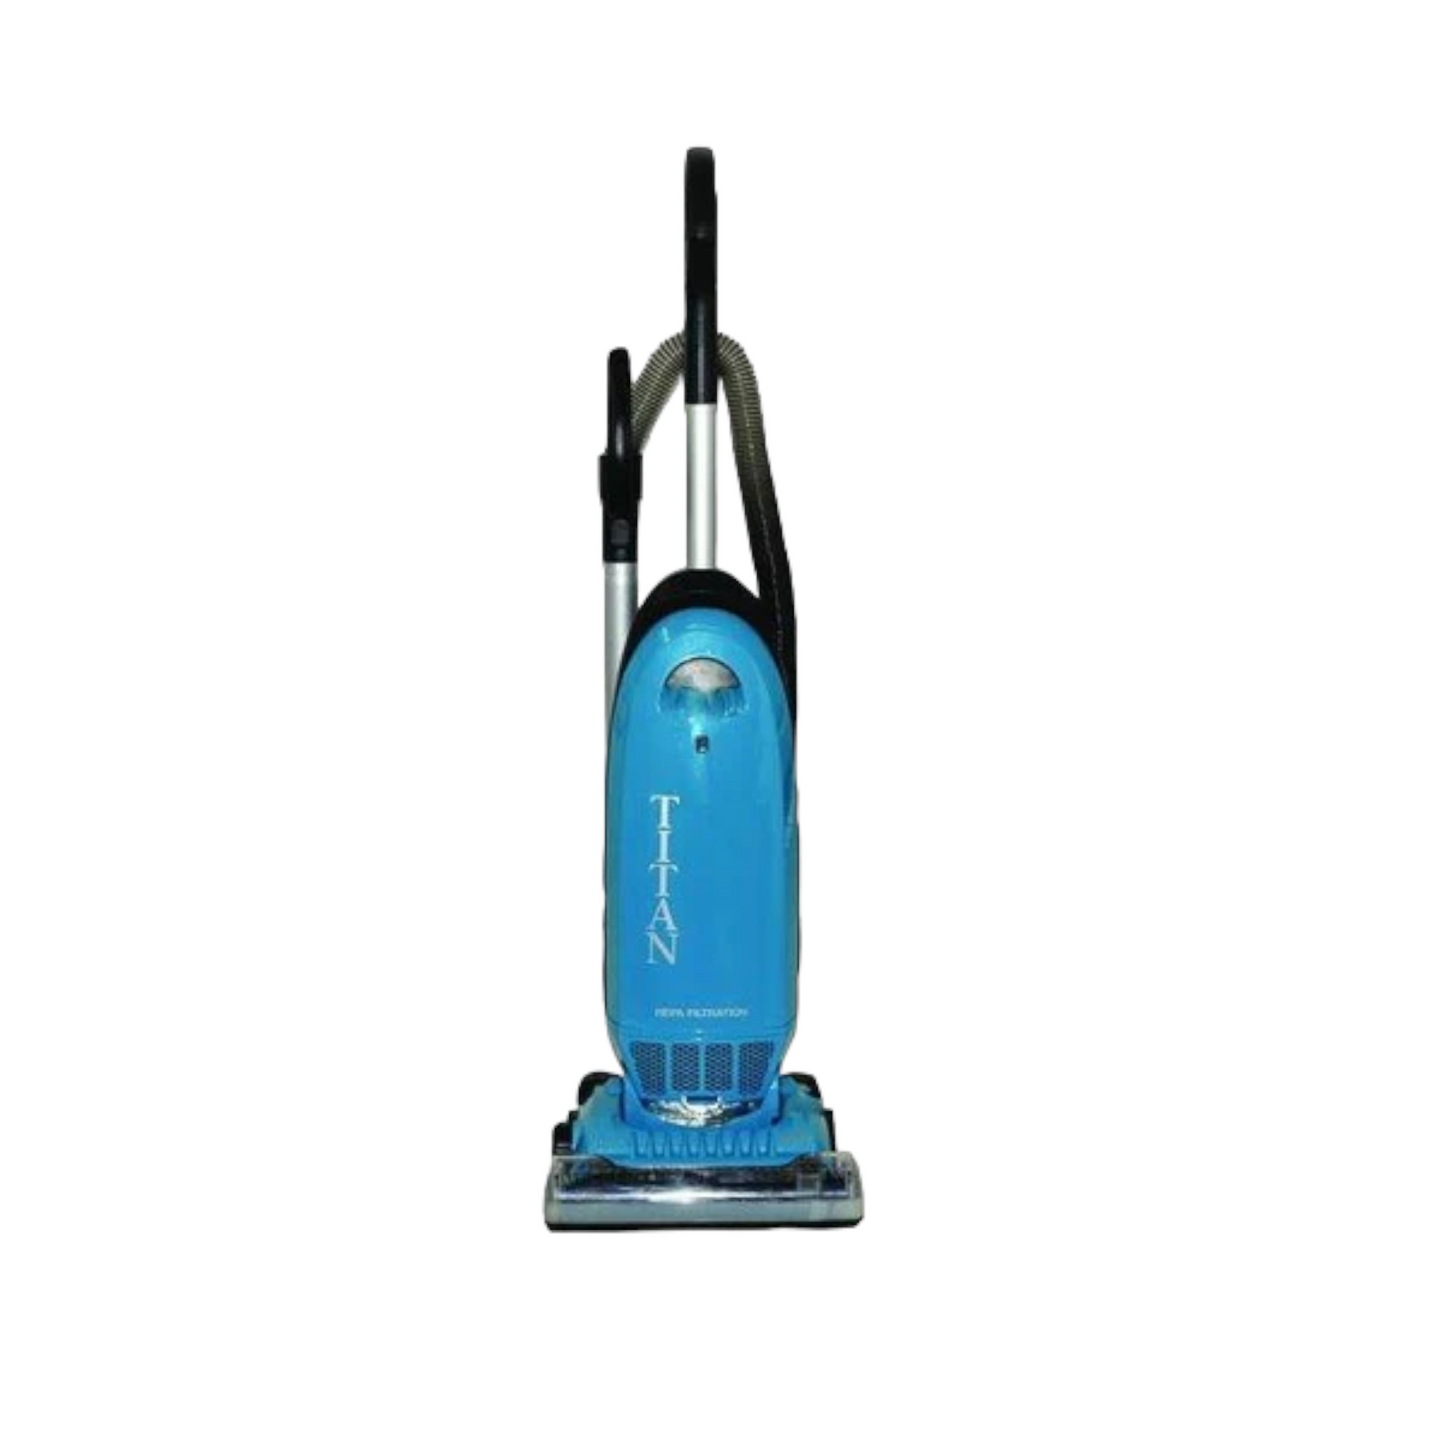 Titan T3200 Deluxe HEPA Upright Vacuum Cleaner with Attachments